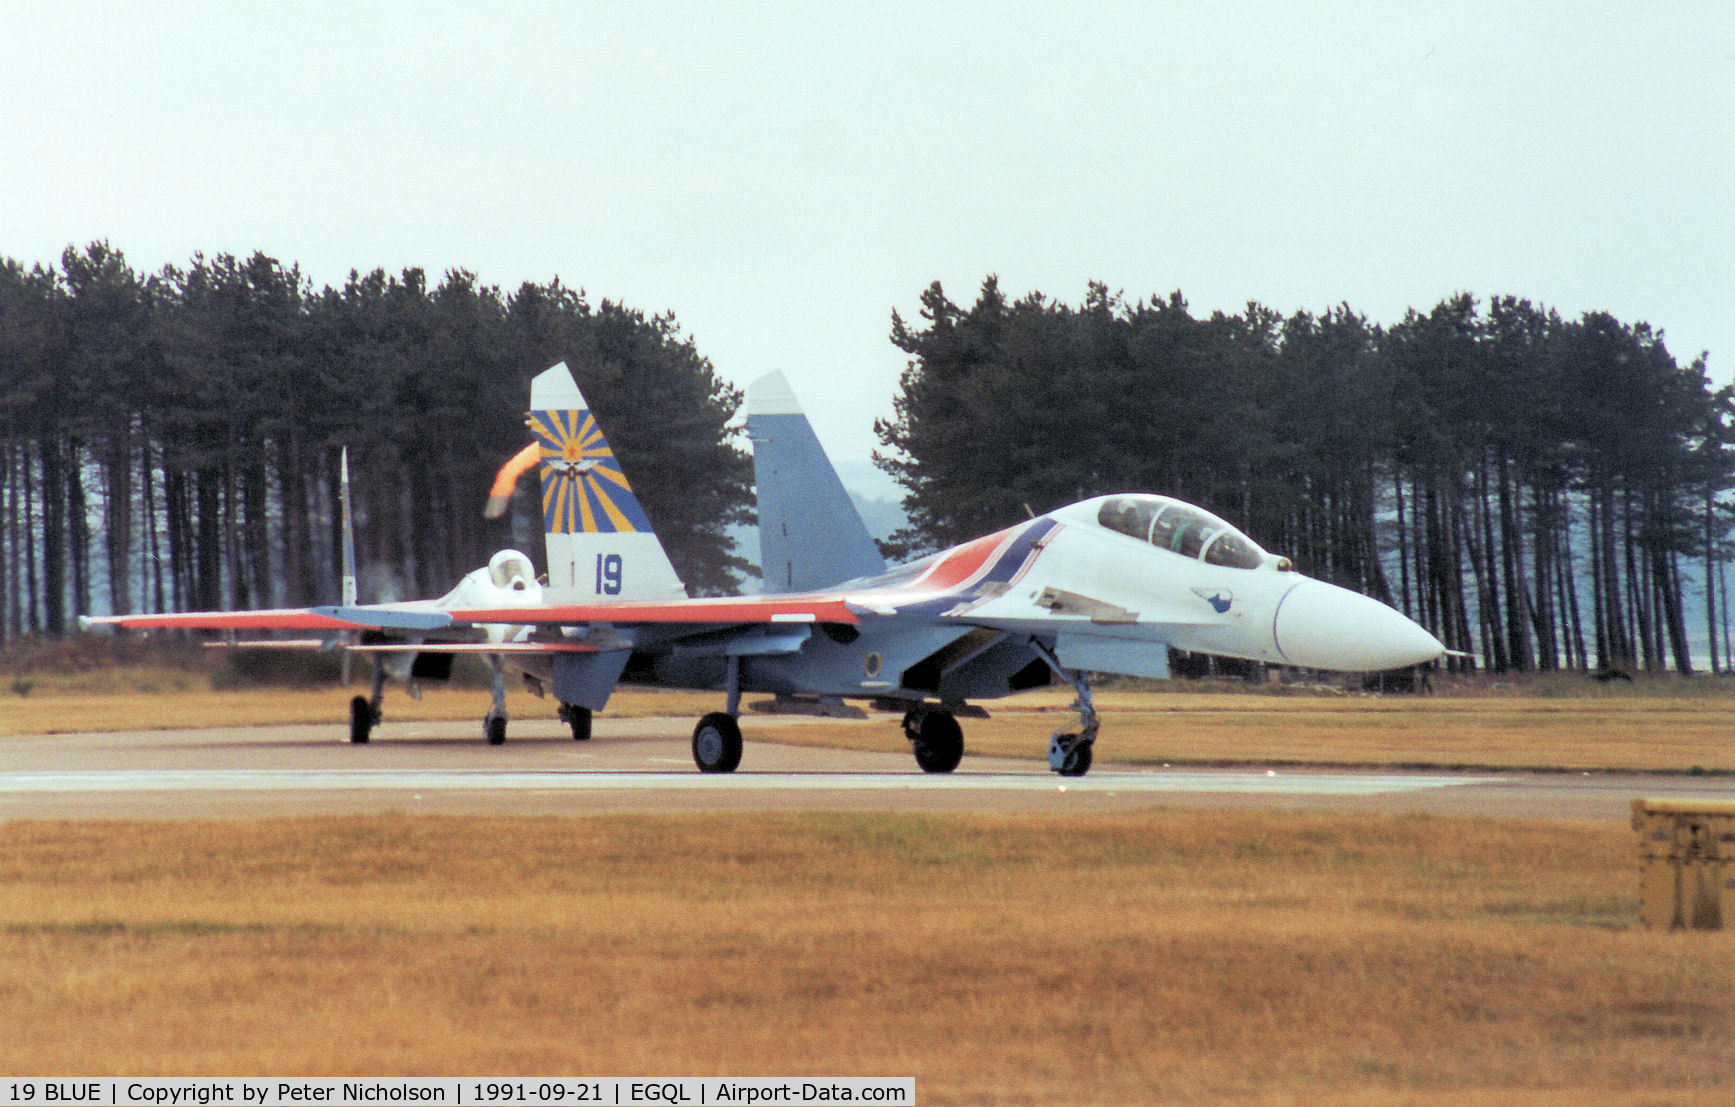 19 BLUE, Sukhoi Su-27UB C/N 1040807, Flanker C of the Russian Knights display team taxying onto the active runway at the 1991 RAF Leuchars Airshow.